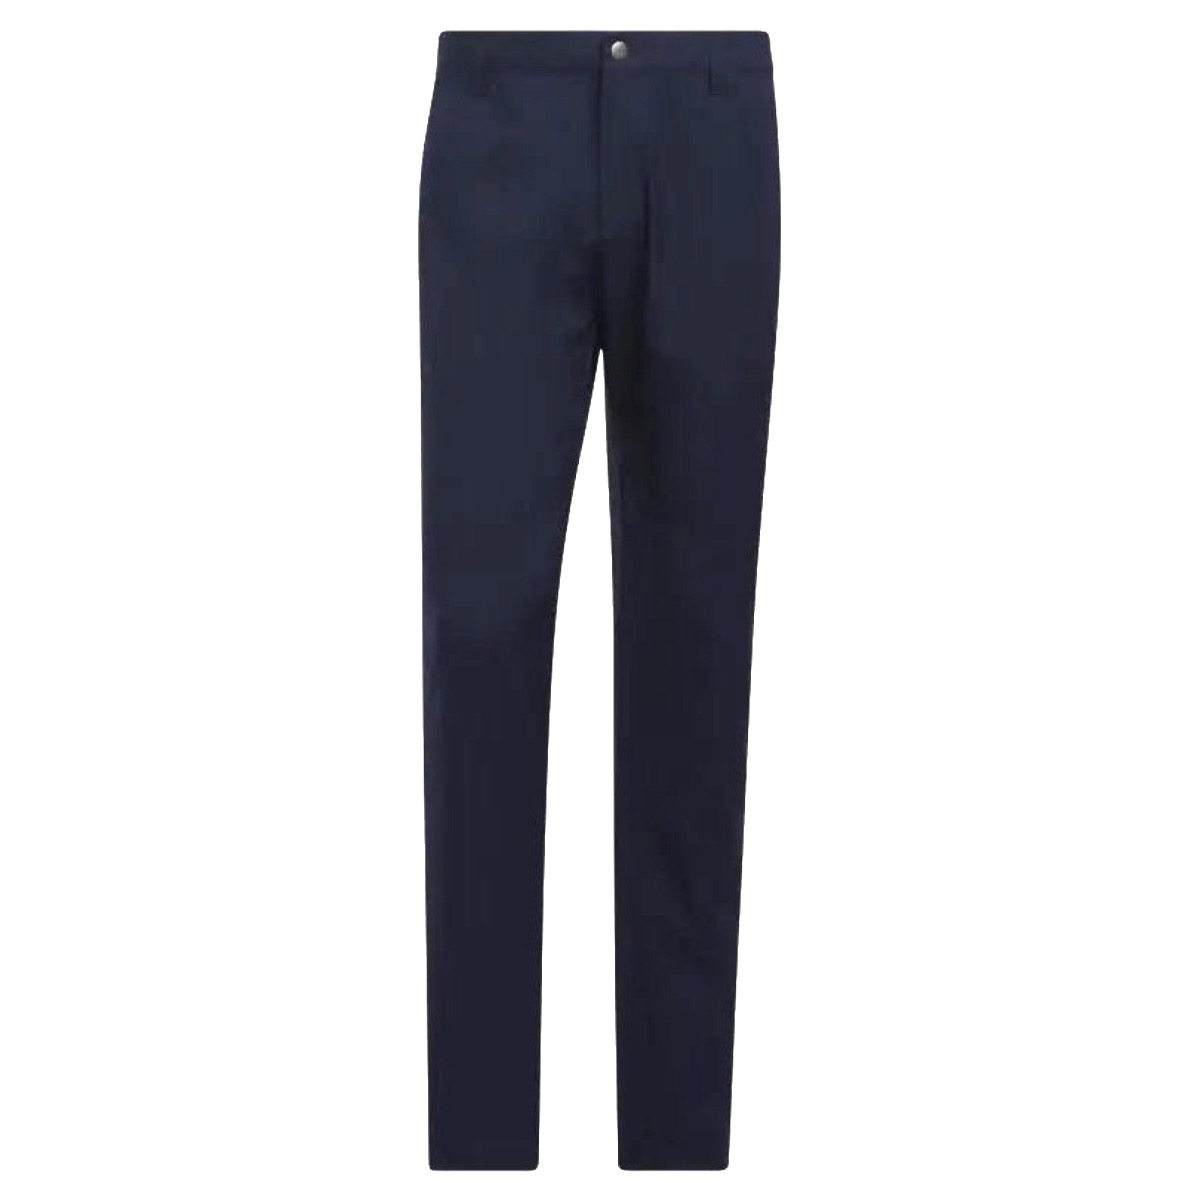 Adidas Ultimate365 Tapered Pant Navy